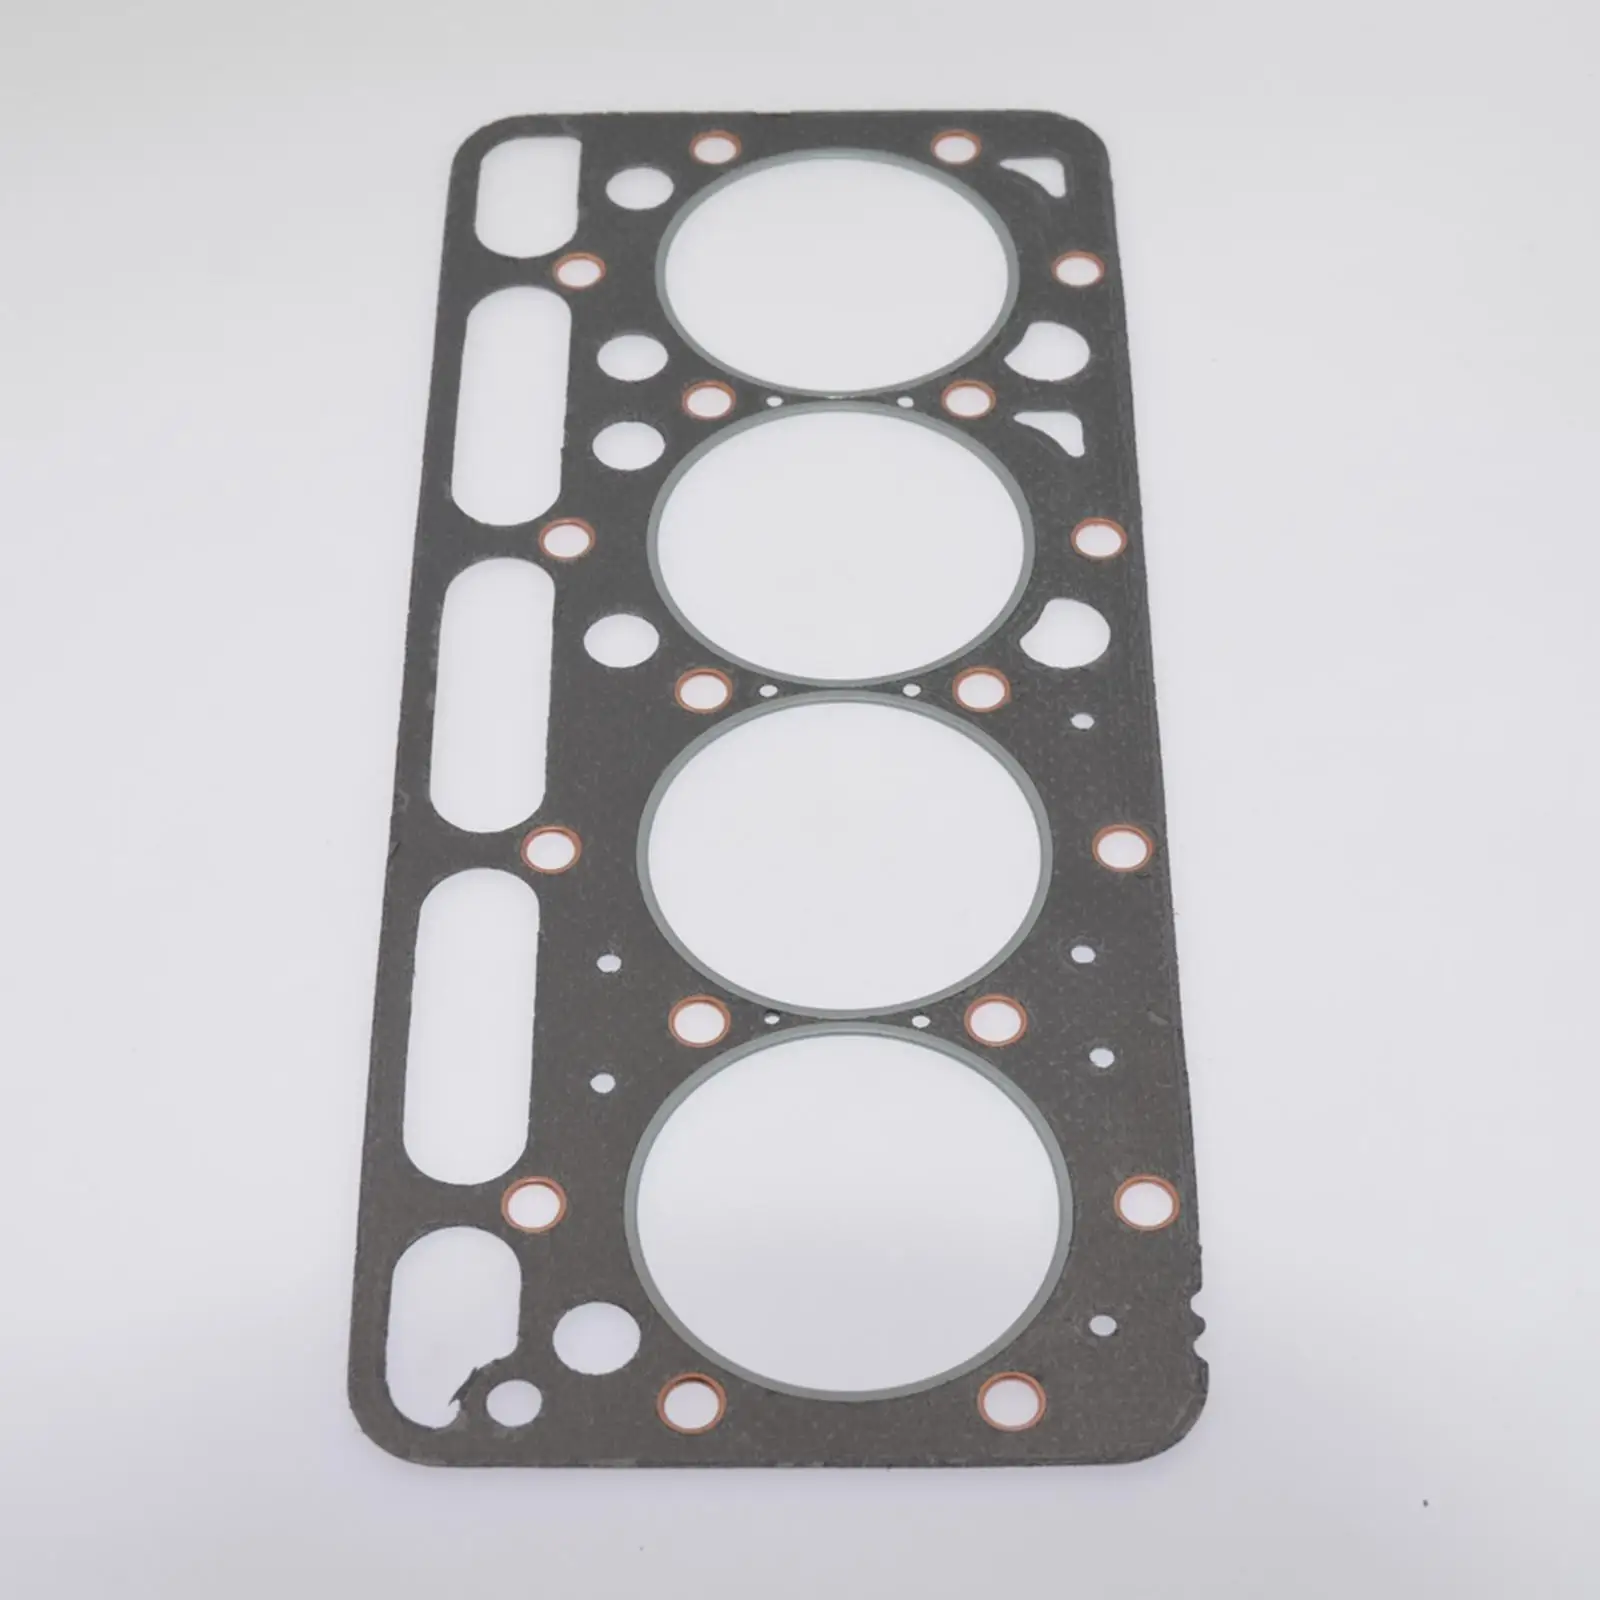 19077-03310 Head Gasket Parts Durable Easy to Install for Bobcat